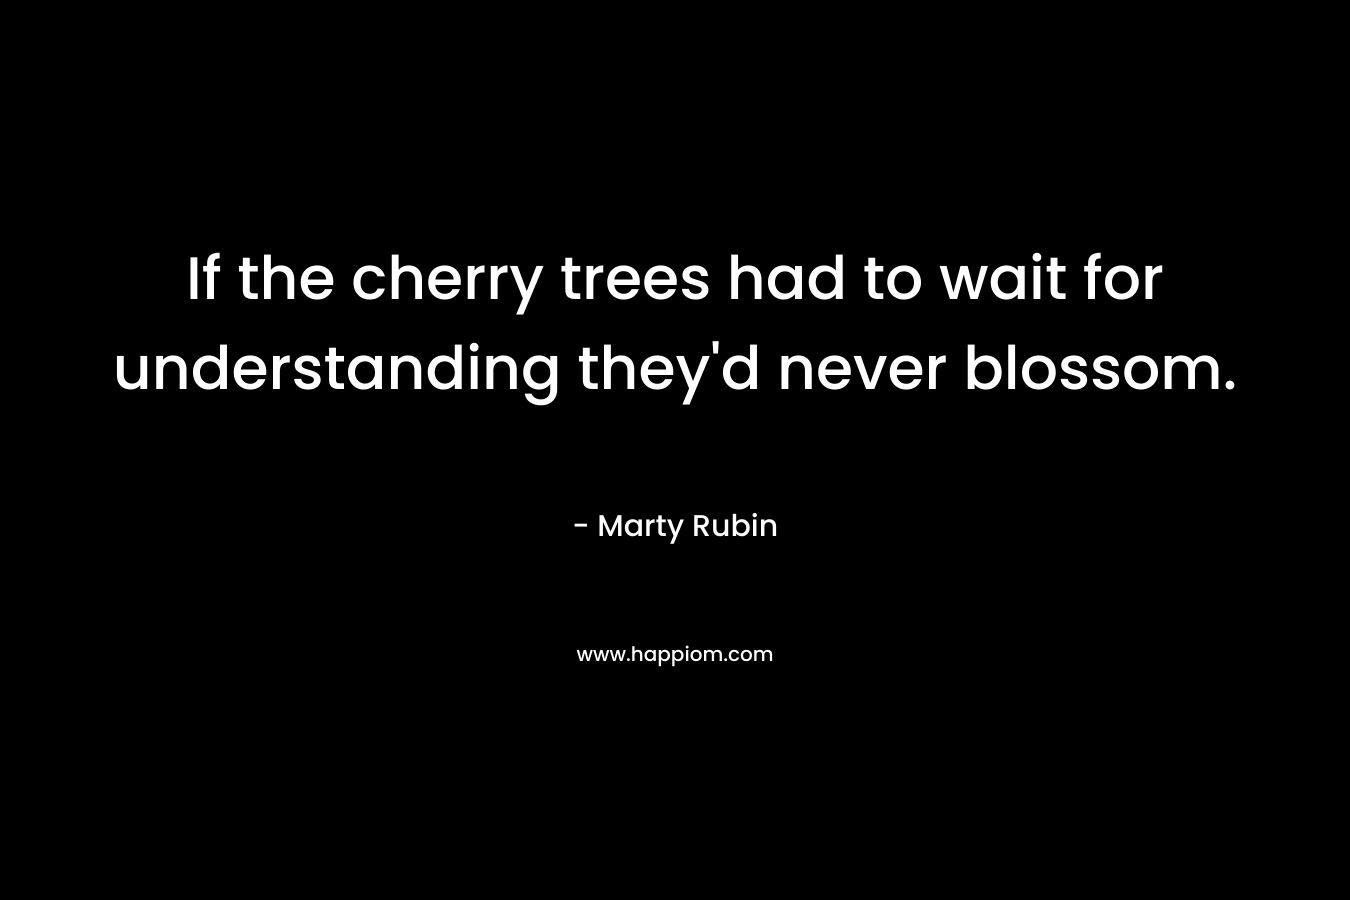 If the cherry trees had to wait for understanding they’d never blossom. – Marty Rubin